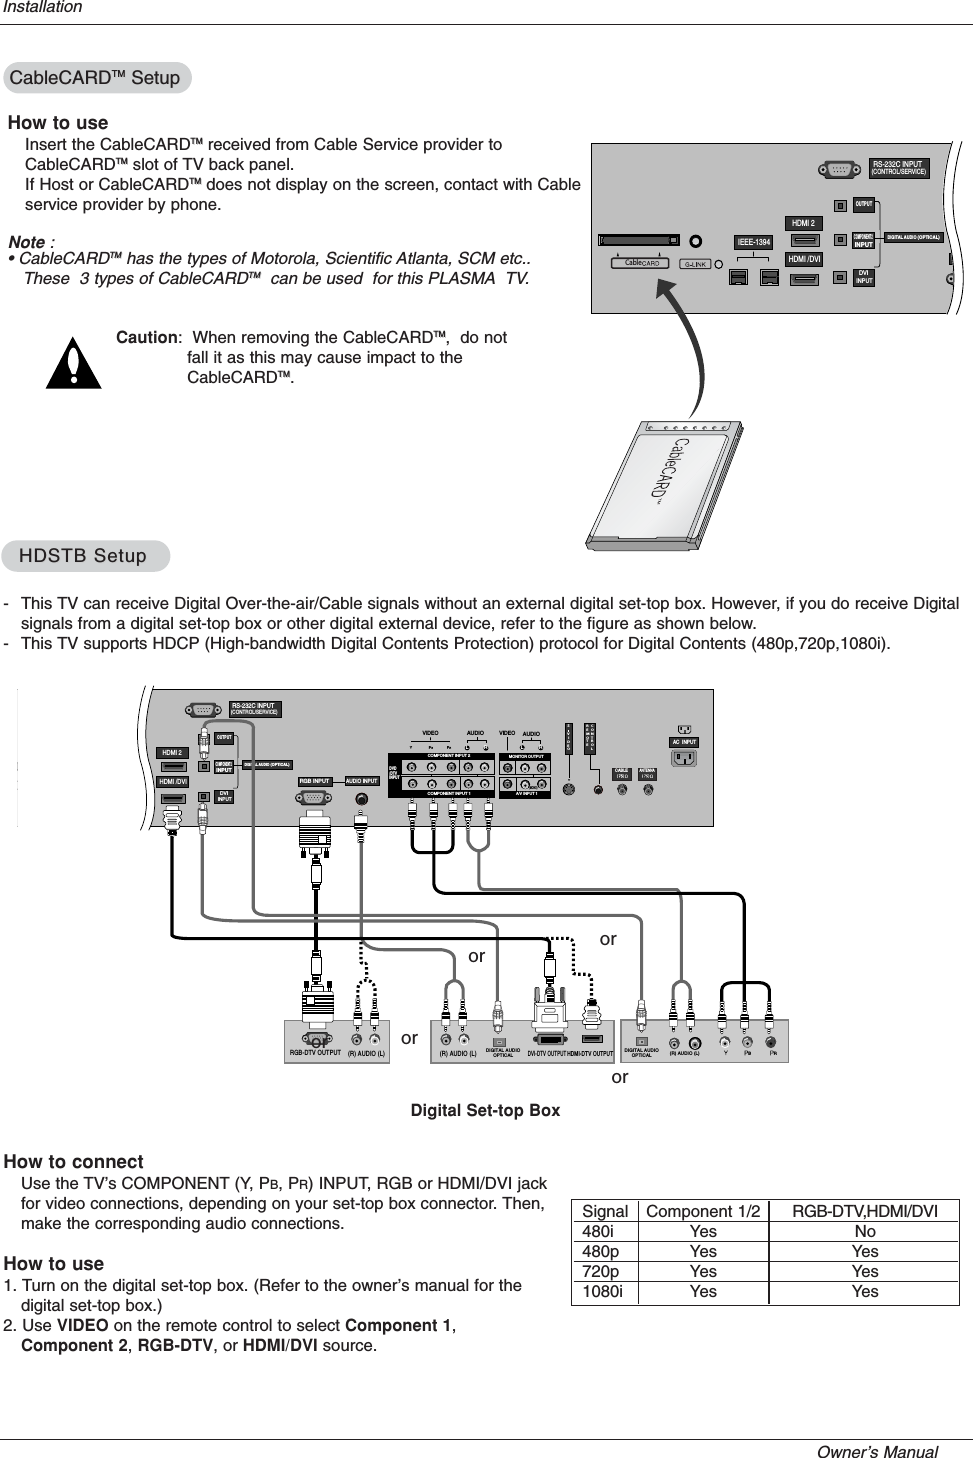 Owner’s Manual   Installation- This TV can receive Digital Over-the-air/Cable signals without an external digital set-top box. However, if you do receive Digitalsignals from a digital set-top box or other digital external device, refer to the figure as shown below.- This TV supports HDCP (High-bandwidth Digital Contents Protection) protocol for Digital Contents (480p,720p,1080i).How to connectUse the TV’s COMPONENT (Y, PB, PR) INPUT, RGB or HDMI/DVI jackfor video connections, depending on your set-top box connector. Then,make the corresponding audio connections.How to use1. Turn on the digital set-top box. (Refer to the owner’s manual for thedigital set-top box.) 2. Use VIDEO on the remote control to select Component 1,Component 2,RGB-DTV, or HDMI/DVI source.HDSTB SetupHDSTB SetupRS-232C INPUT(CONTROL/SERVICE)AUDIORLDIGITAL AUDIO (OPTICAL)DVIINPUTCOMPONENT2INPUTOUTPUTAUDIO INPUTRGB INPUTVIDEOHDMI 2HDMI /DVICOMPONENT INPUT 1RL(MONO)V IDEOSREMOTECONTROLCABLEANTENNA AC  INPUTDVD/DTVINPUTIEEE-1394COMPONENT INPUT 2MONITOR OUTPUTA/V INPUT 1VIDEOAUDIOCable(R) AUDIO (L)RGB-DTV OUTPUTBR(R) AUDIO (L)DIGITAL AUDIOOPTICAL(R) AUDIO (L)DVI-DTV OUTPUTDIGITAL AUDIOOPTICALHDMI-DTV OUTPUTDigital Set-top BoxororororSignal480i480p720p1080iComponent 1/2YesYesYesYesRGB-DTV,HDMI/DVINoYesYesYesCableCARDCableCARDTMTM SetupSetupRS-232C INPUT(CONTROL/SERVICE)DIGITAL AUDIO (OPTICAL)DVIINPUTCOMPONENT2INPUTOUTPUTRGB INPHDMI 2HDMI /DVIIEEE-1394CableHow to useInsert the CableCARDTMTM received from Cable Service provider toCableCARDTMTM slot of TV back panel. If Host or CableCARDTMTM does not display on the screen, contact with Cableservice provider by phone.Note :• CableCARDTMTM has the types of Motorola, Scientific Atlanta, SCM etc..These  3 types of CableCARDTMTM can be used  for this PLASMA TV.Caution:  When removing the CableCARDTMTM,  do notfall it as this may cause impact to theCableCARDTMTM.or